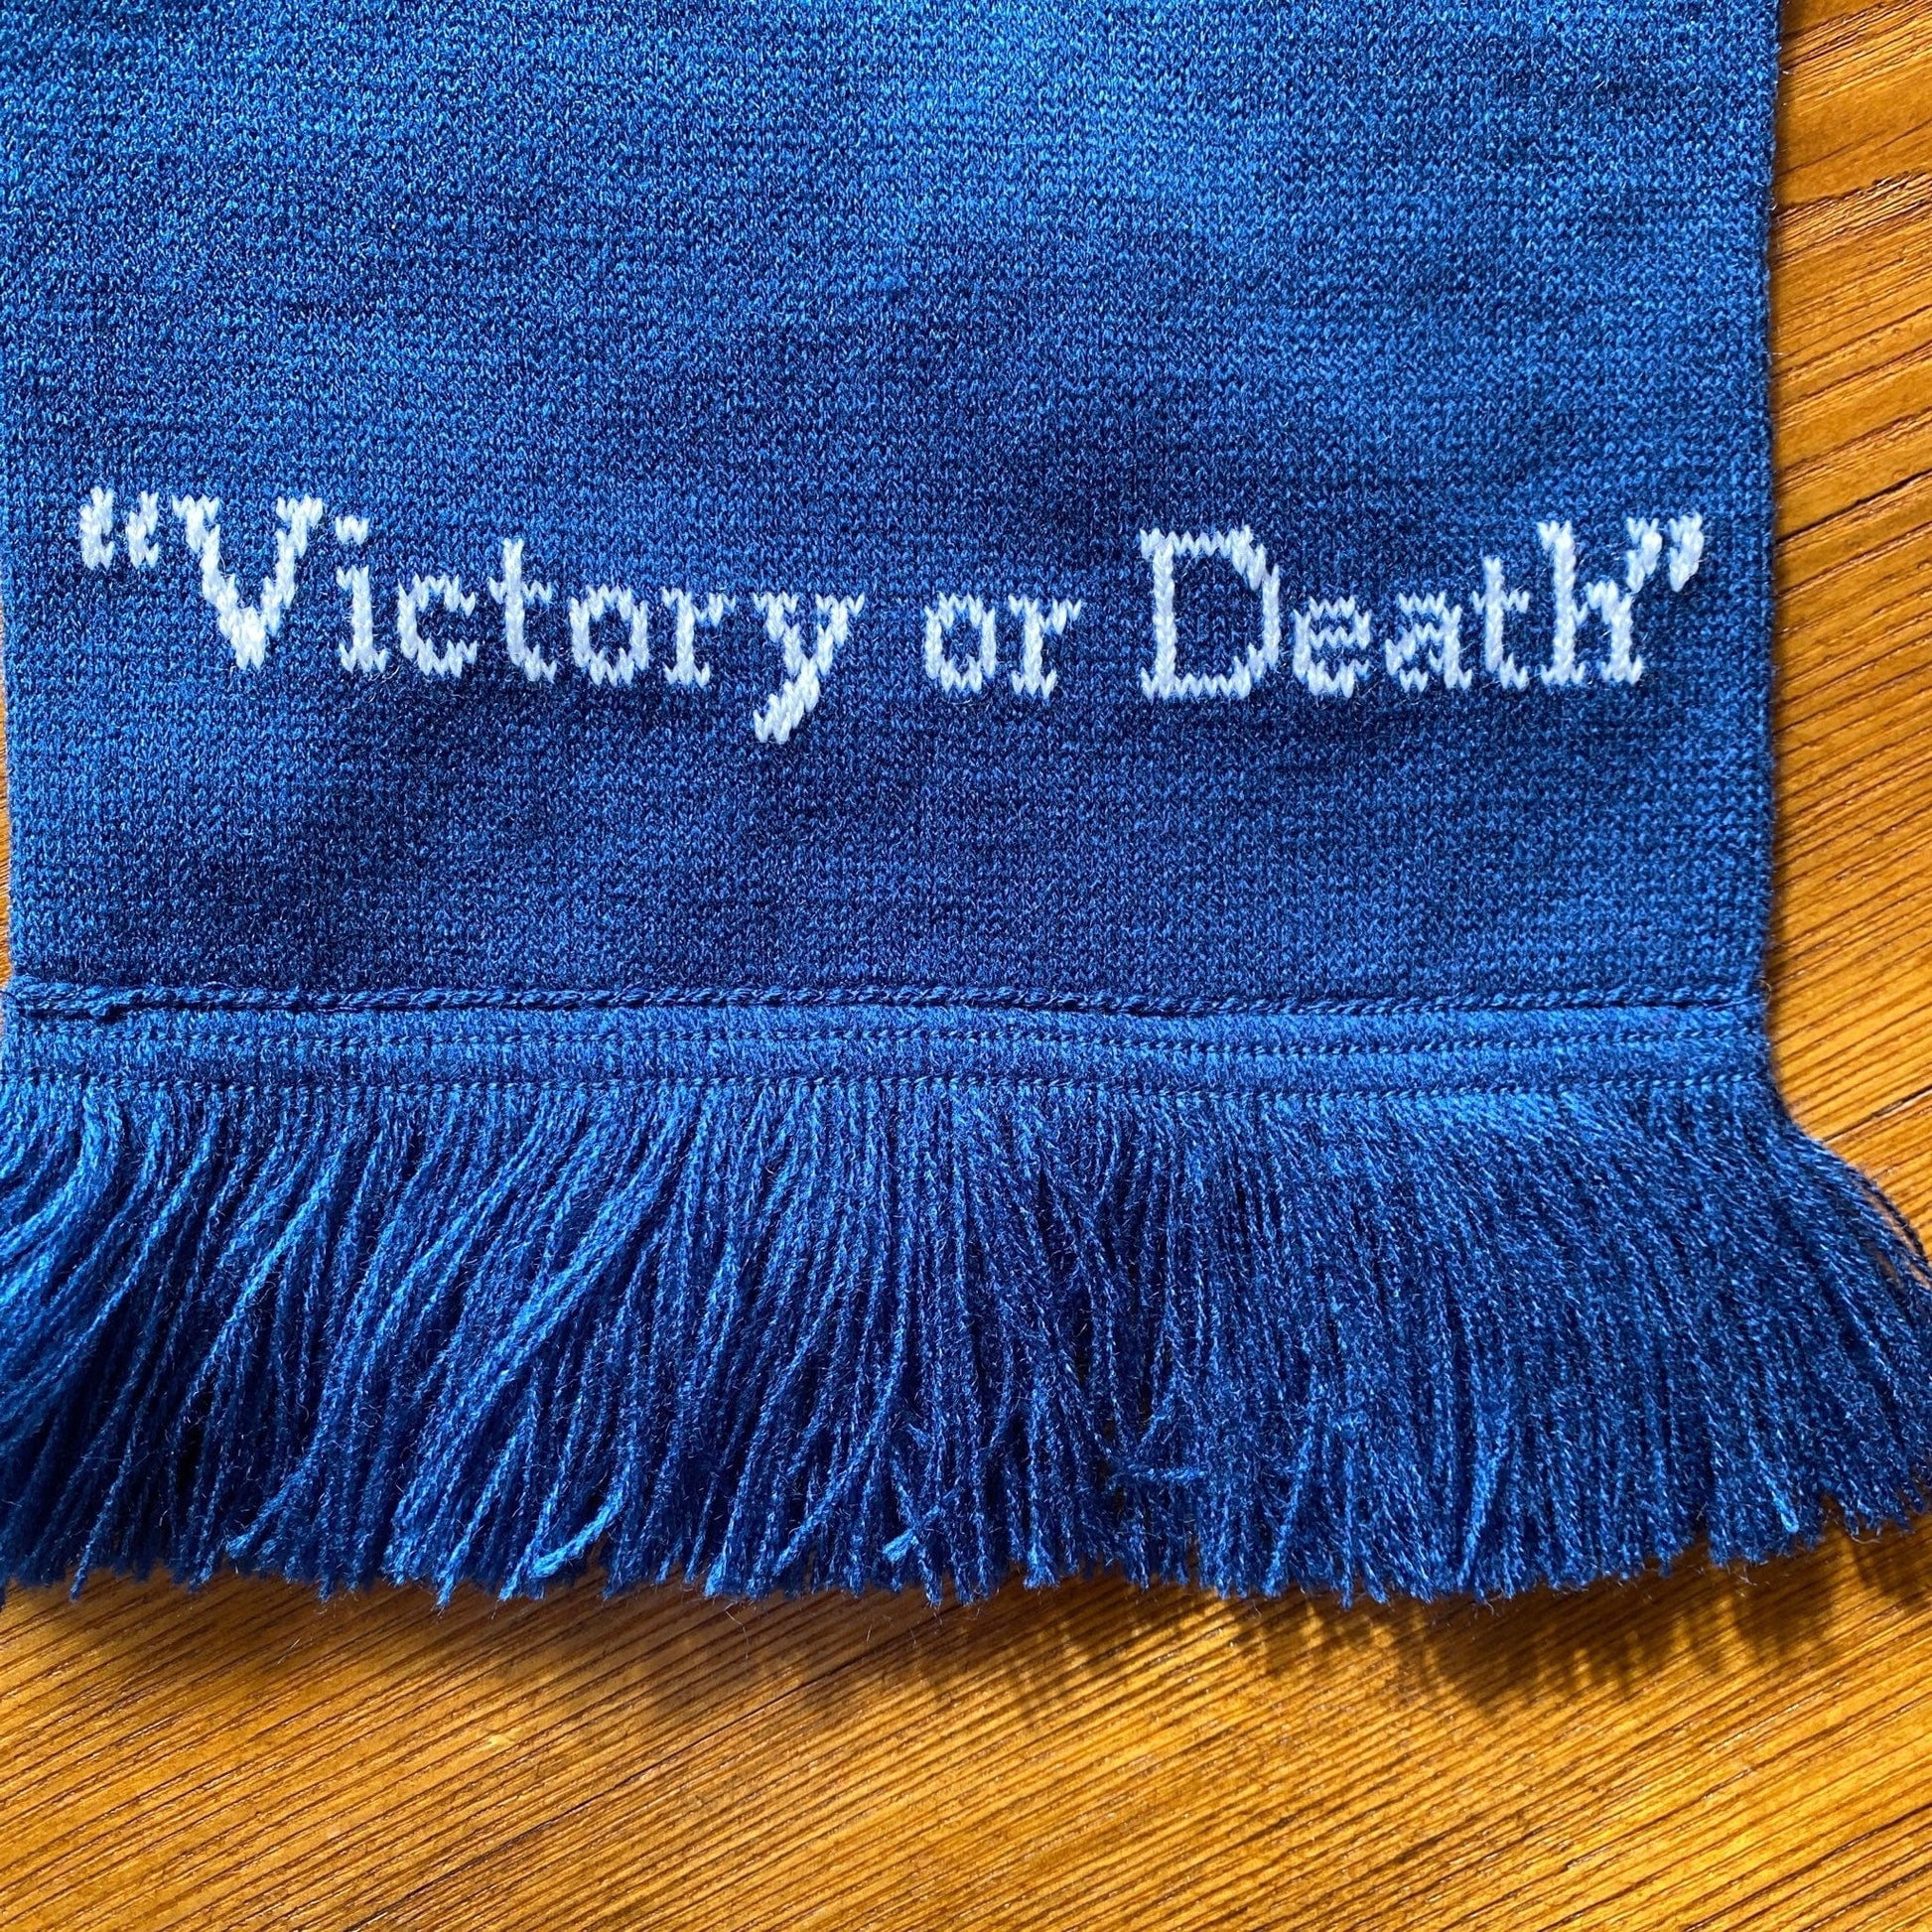 Close-up George Washington Signature "Victory or Death" woven scarf from the history list store